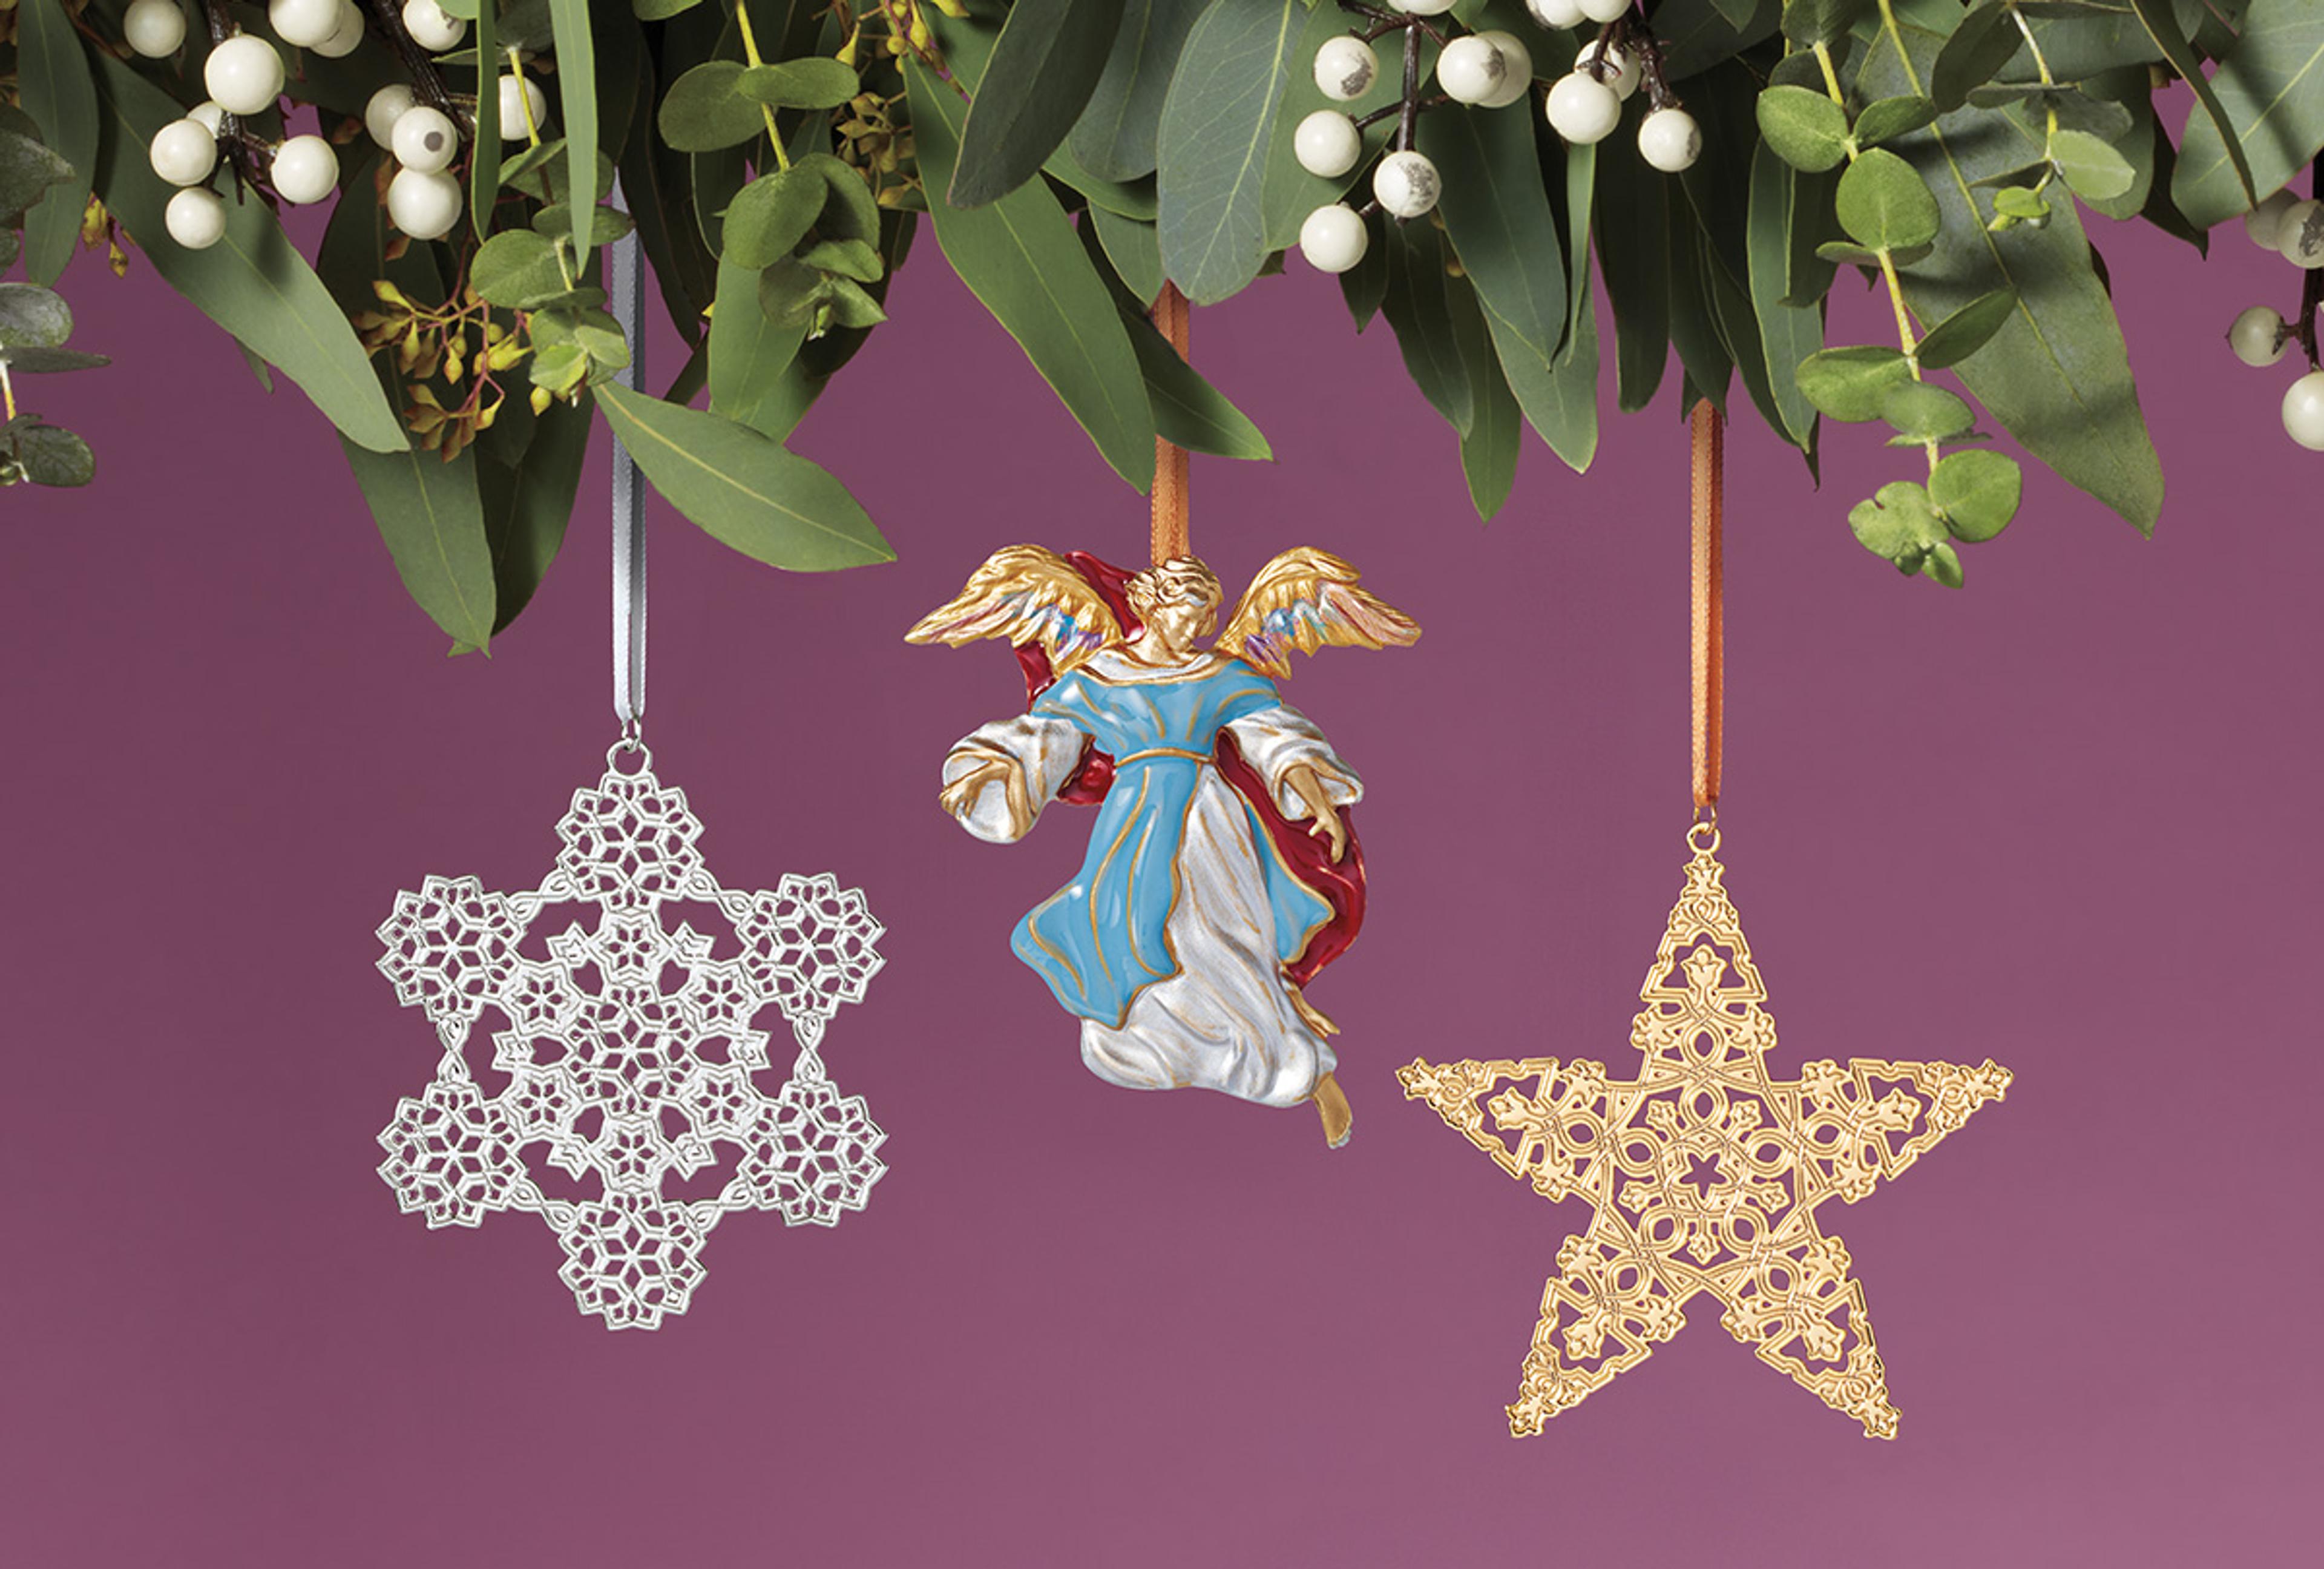 Three holiday ornaments in the shape of a snowflake, angel, and star, hang in front of a violet colored background.